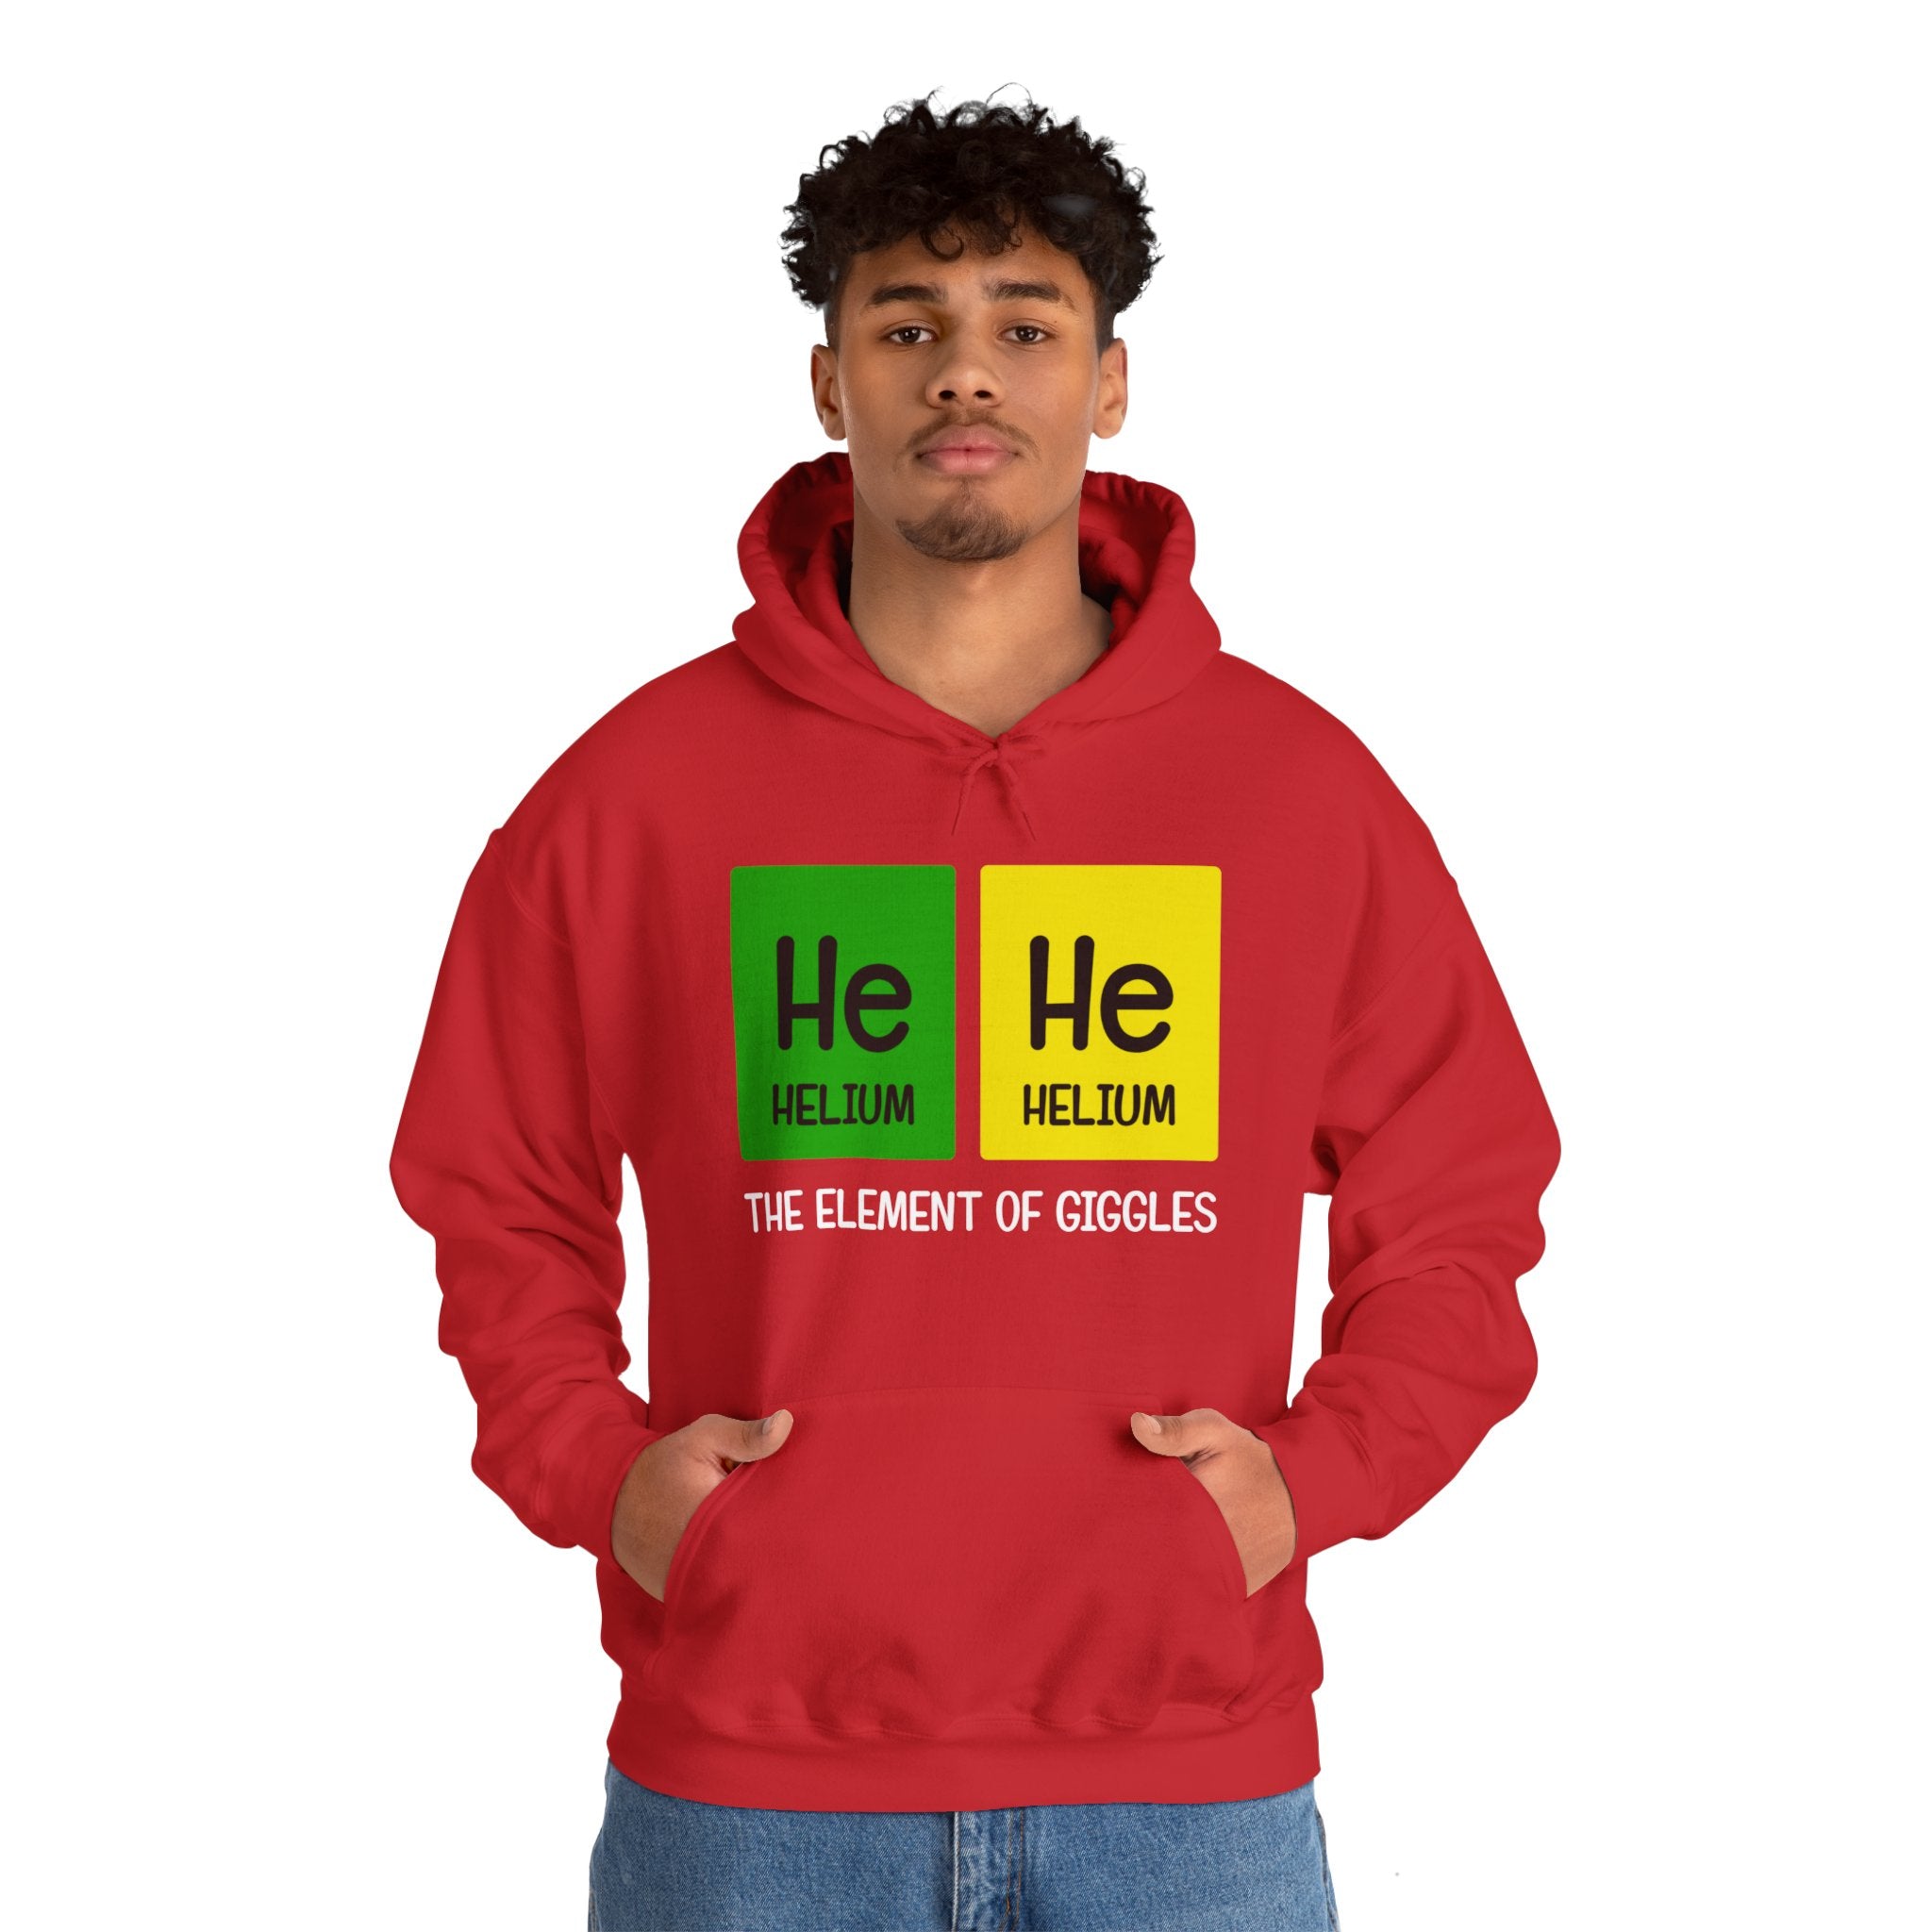 A person wearing a stylish **He-He - Hooded Sweatshirt** with "He Helium The Element of Giggles" printed on it, featuring two periodic table elements "He" in green and yellow squares. The design offers both comfort and a touch of whimsy.